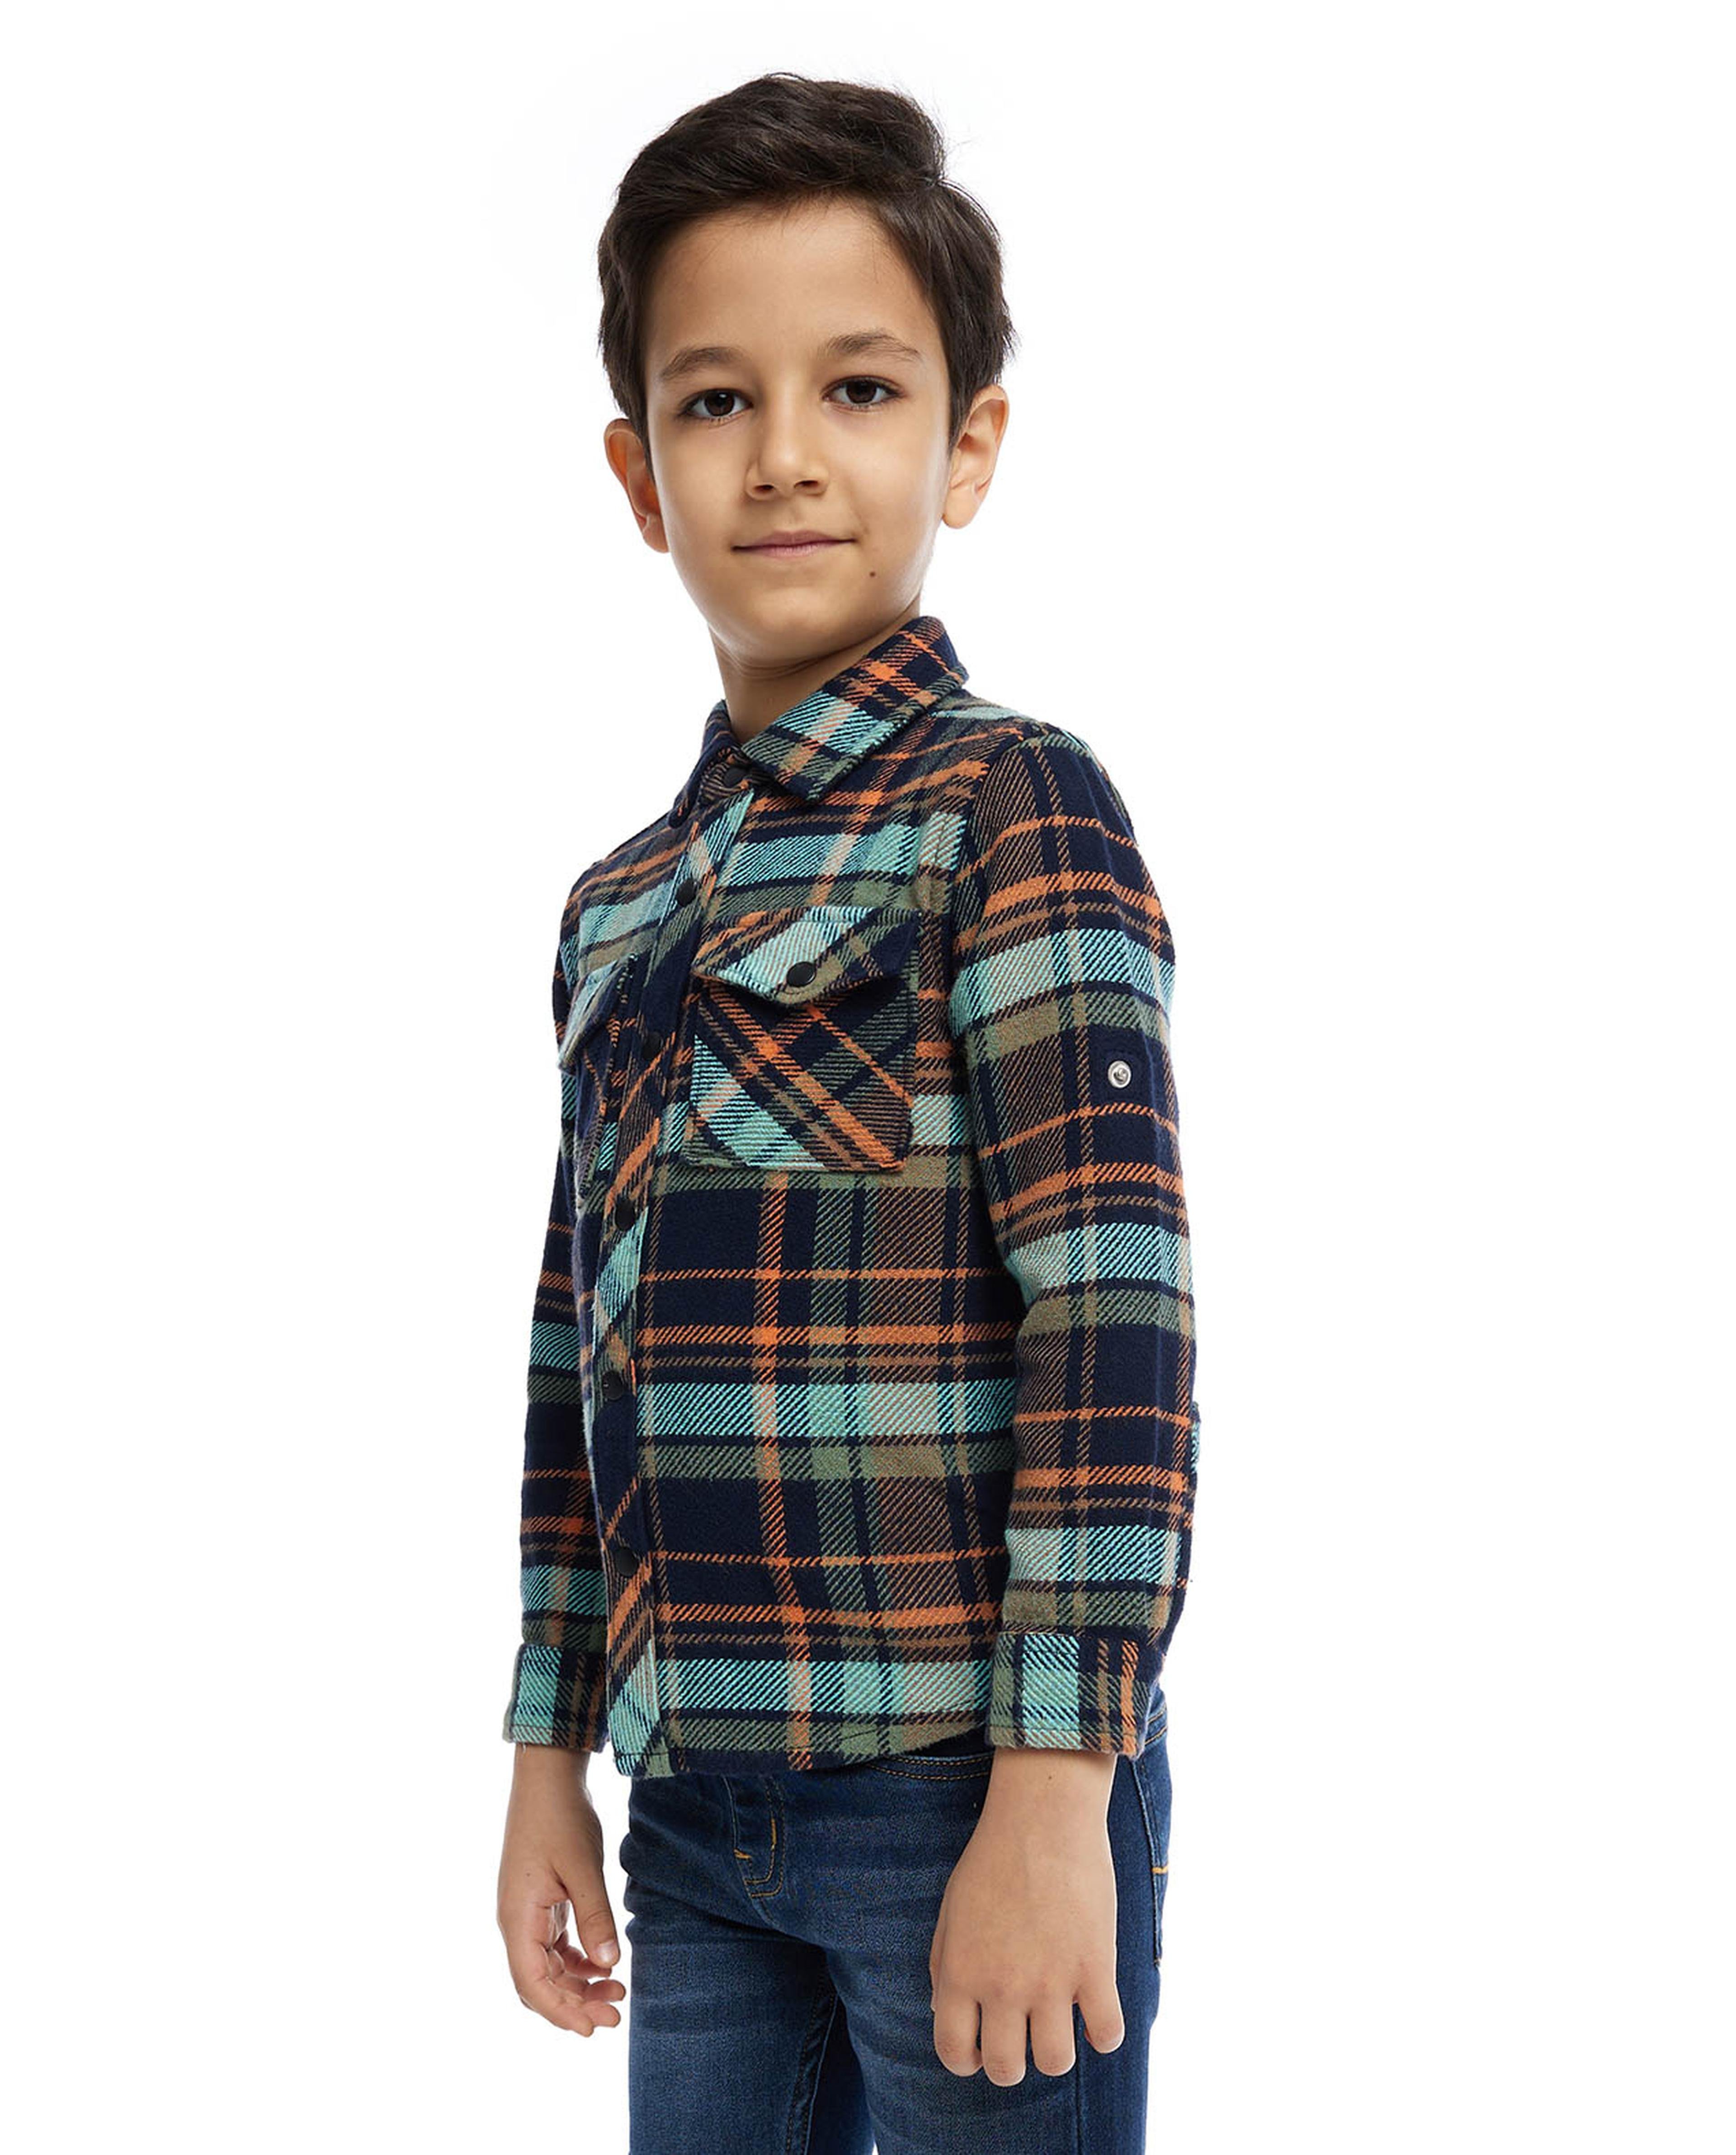 Plaid Shirt with Classic Collar and Long Sleeves